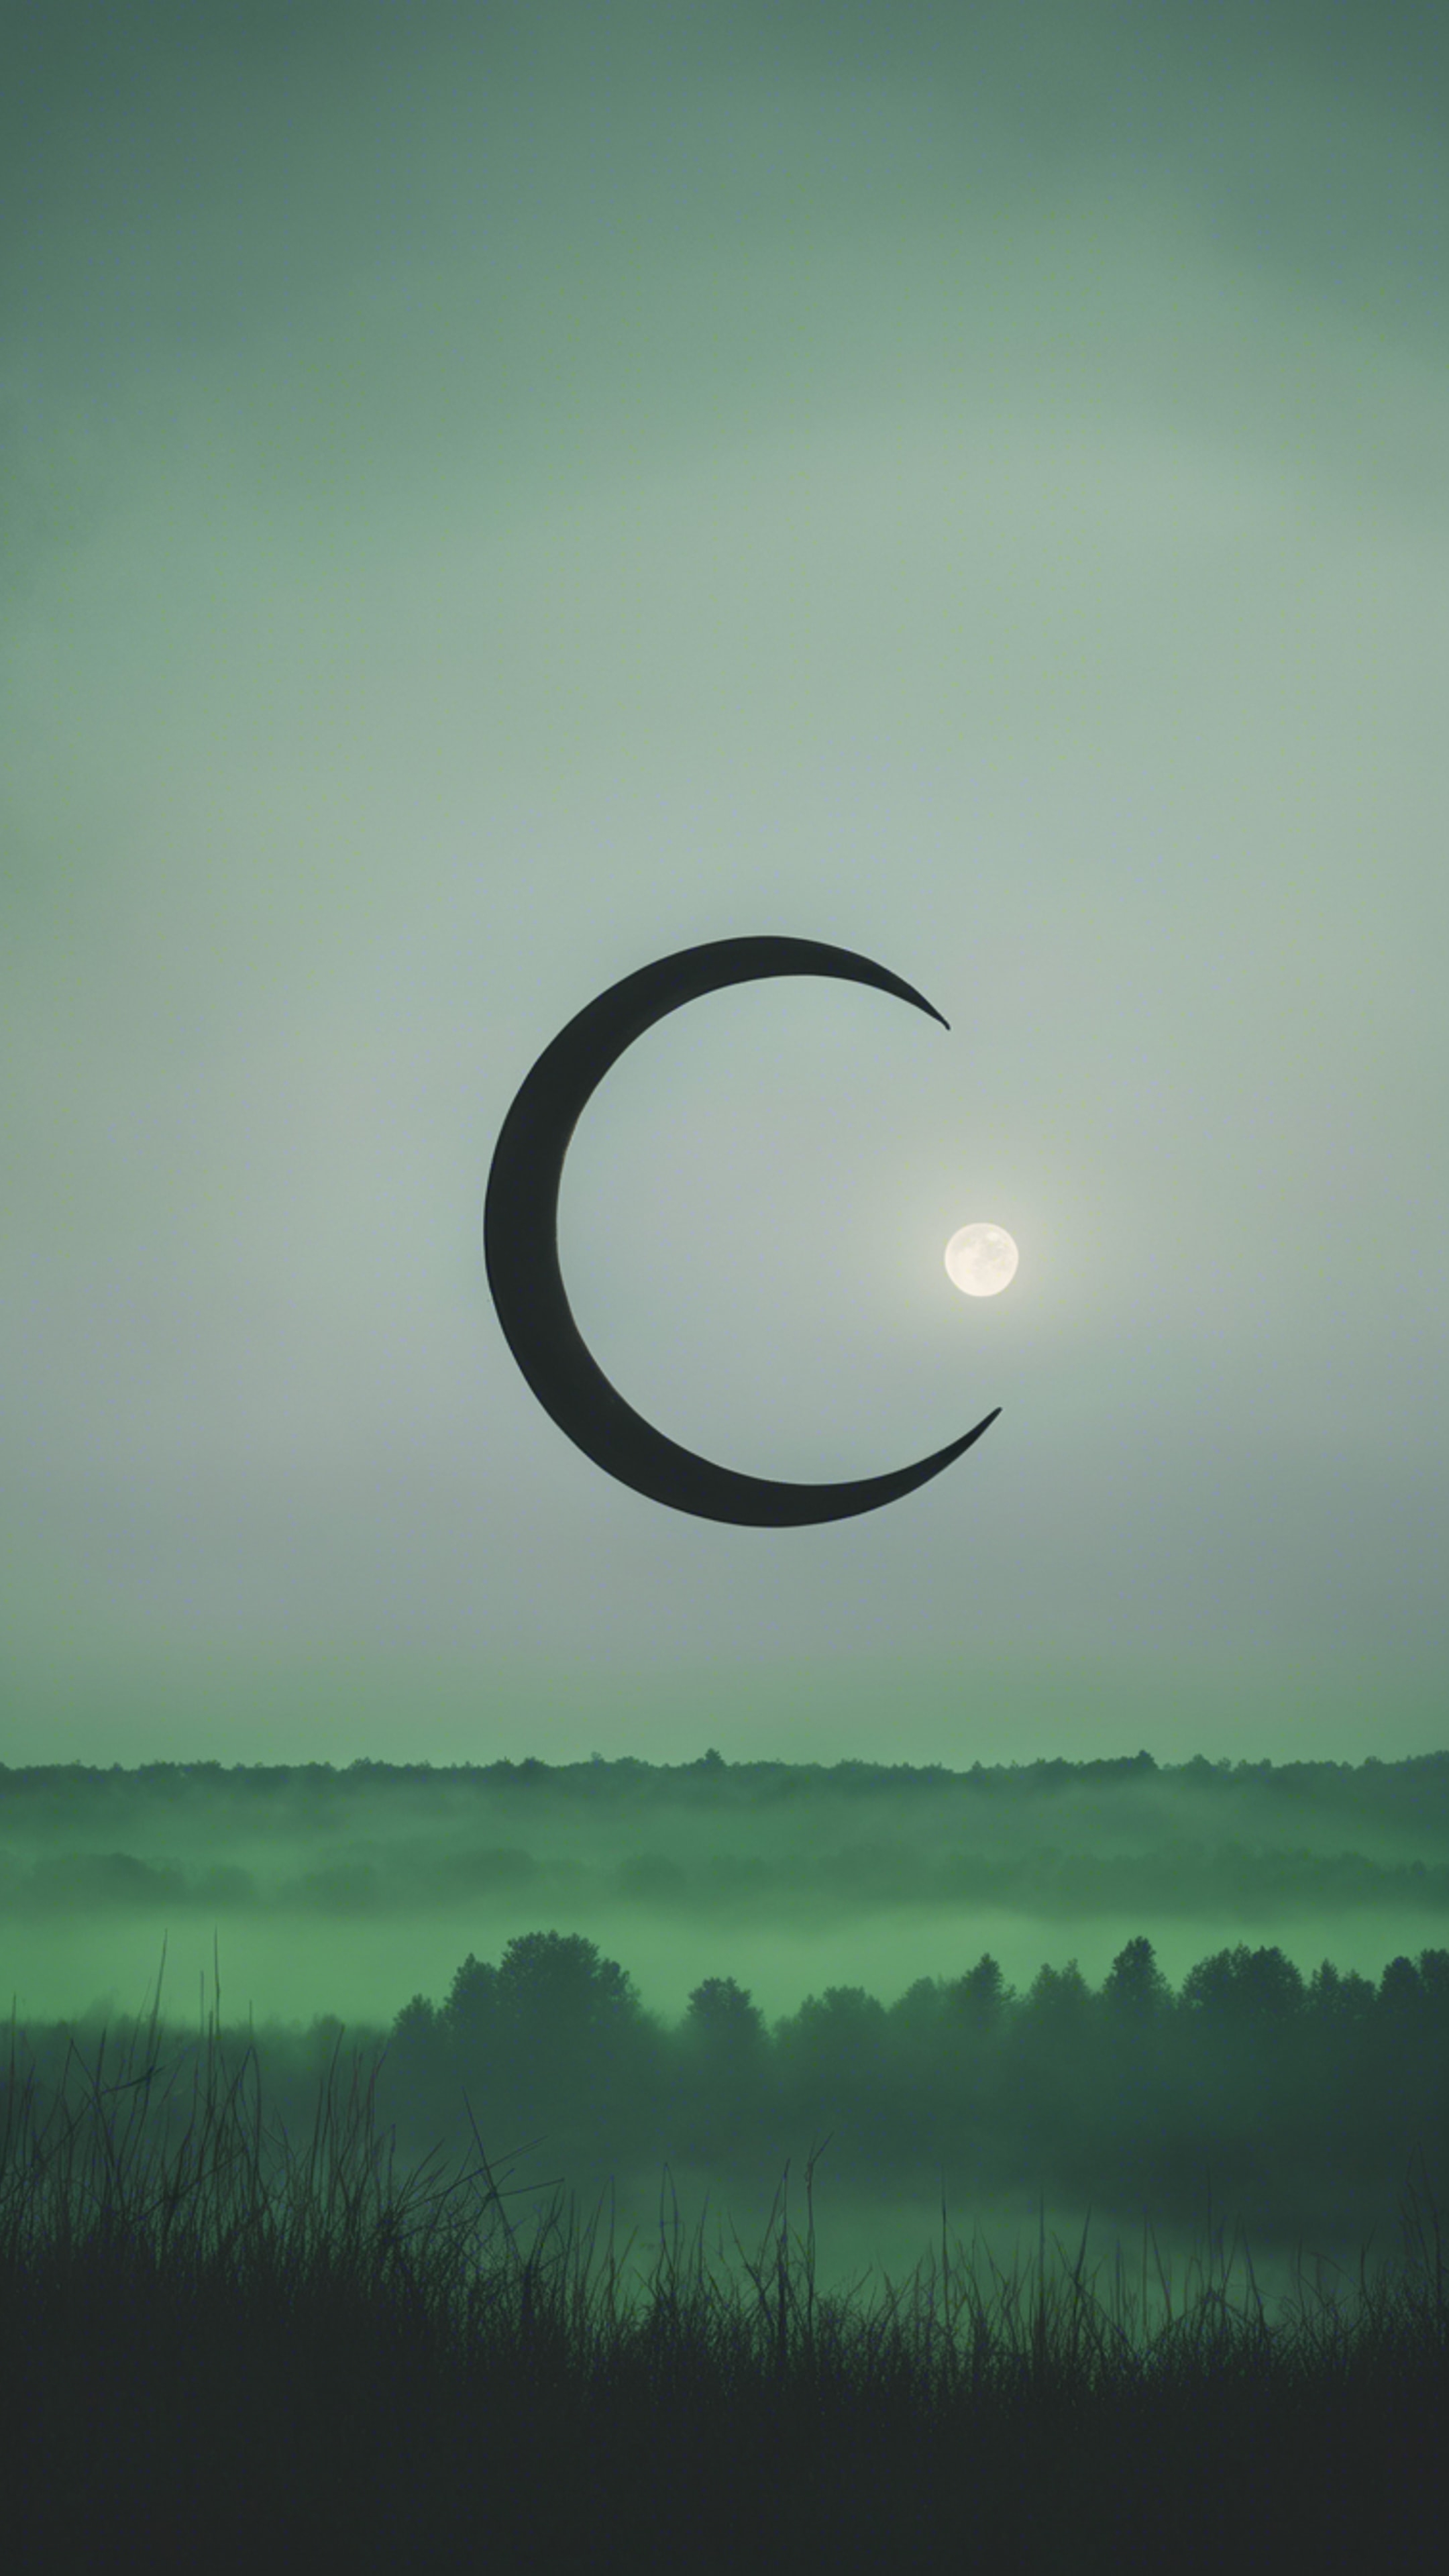 Gothic view of a black crescent moon under a green misty sky. Behang[13b0789ef30c4bbcb3bb]